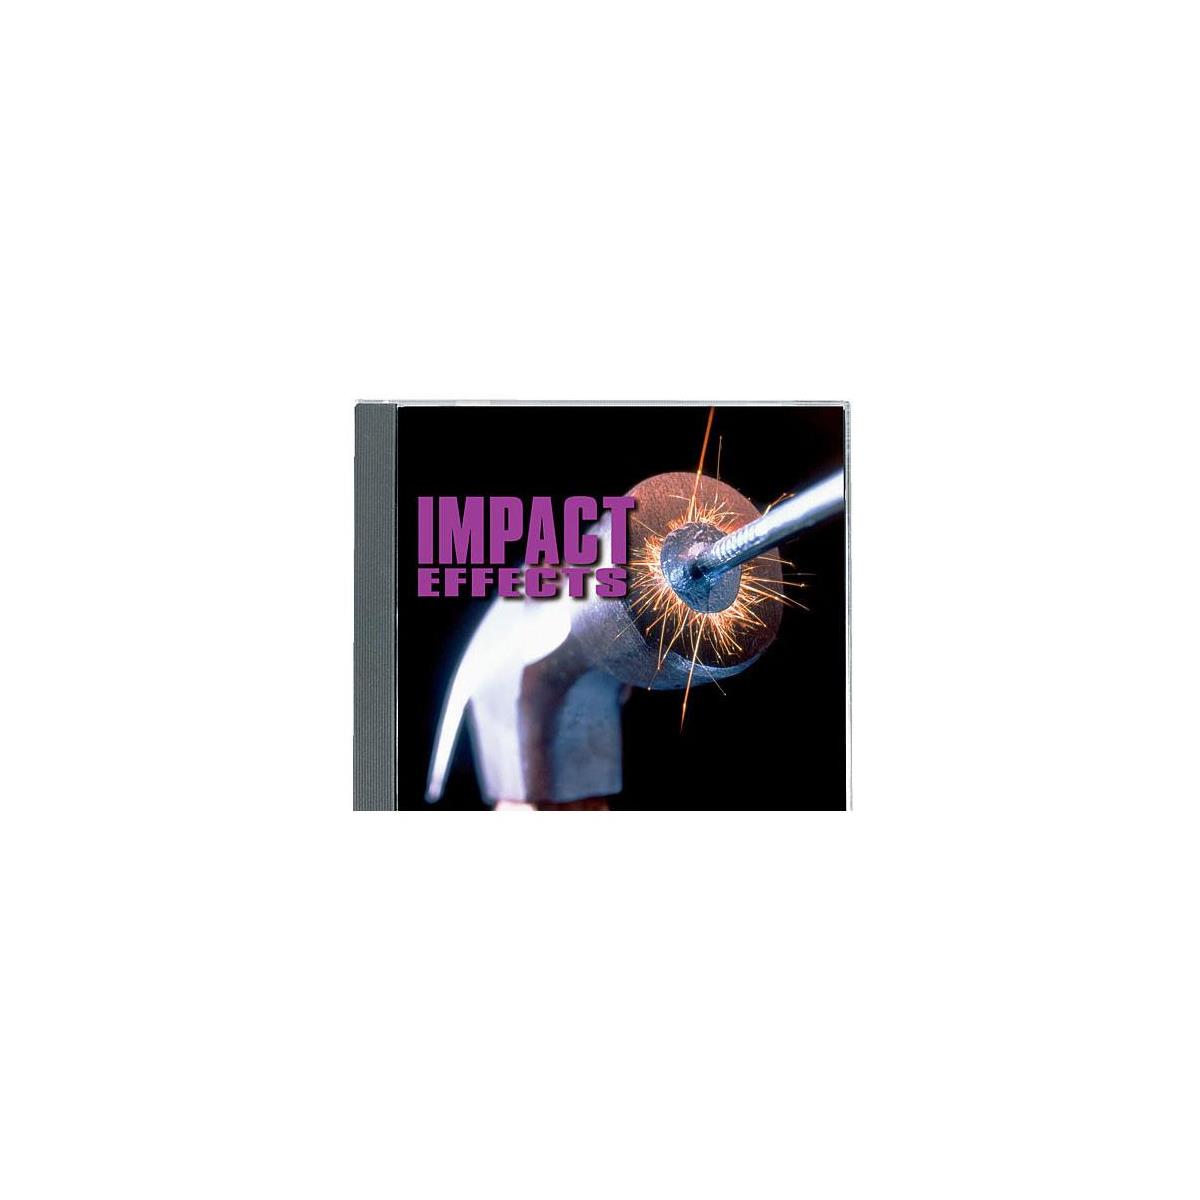 Image of Sound Ideas Impact Effects 1 Sound Effects Library Audio CD